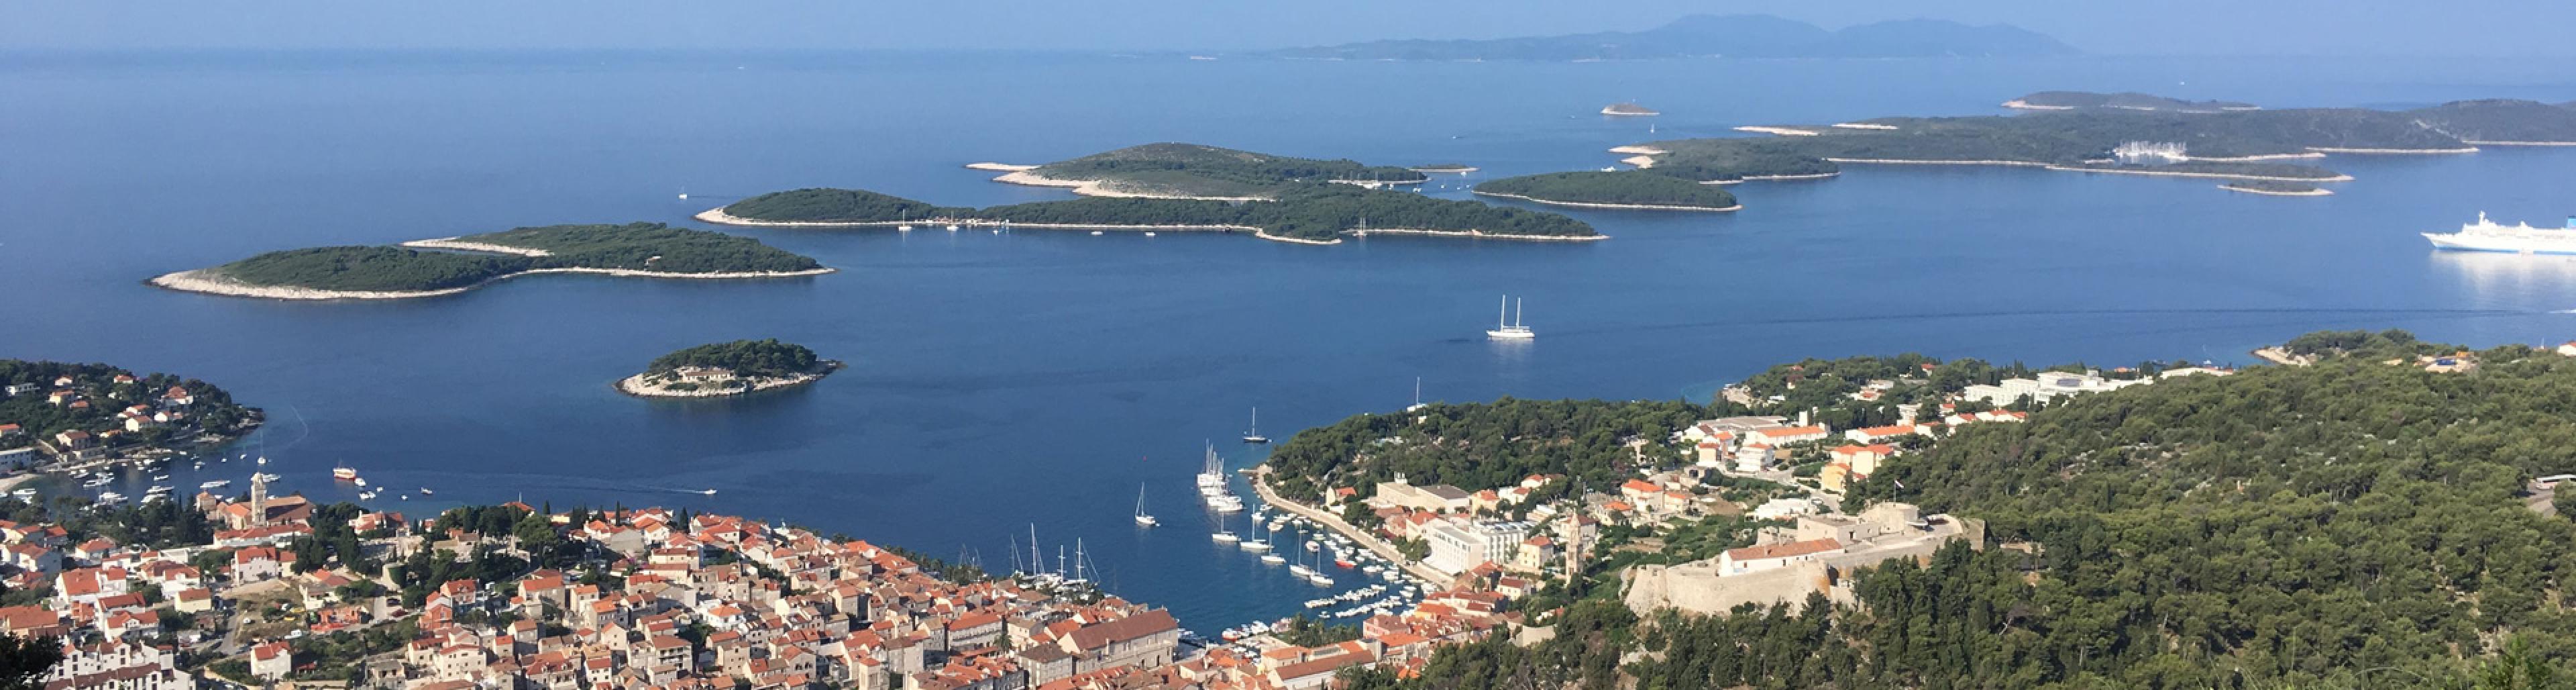 view over town of hvar croatia with tree-topped islands in blue sea in background